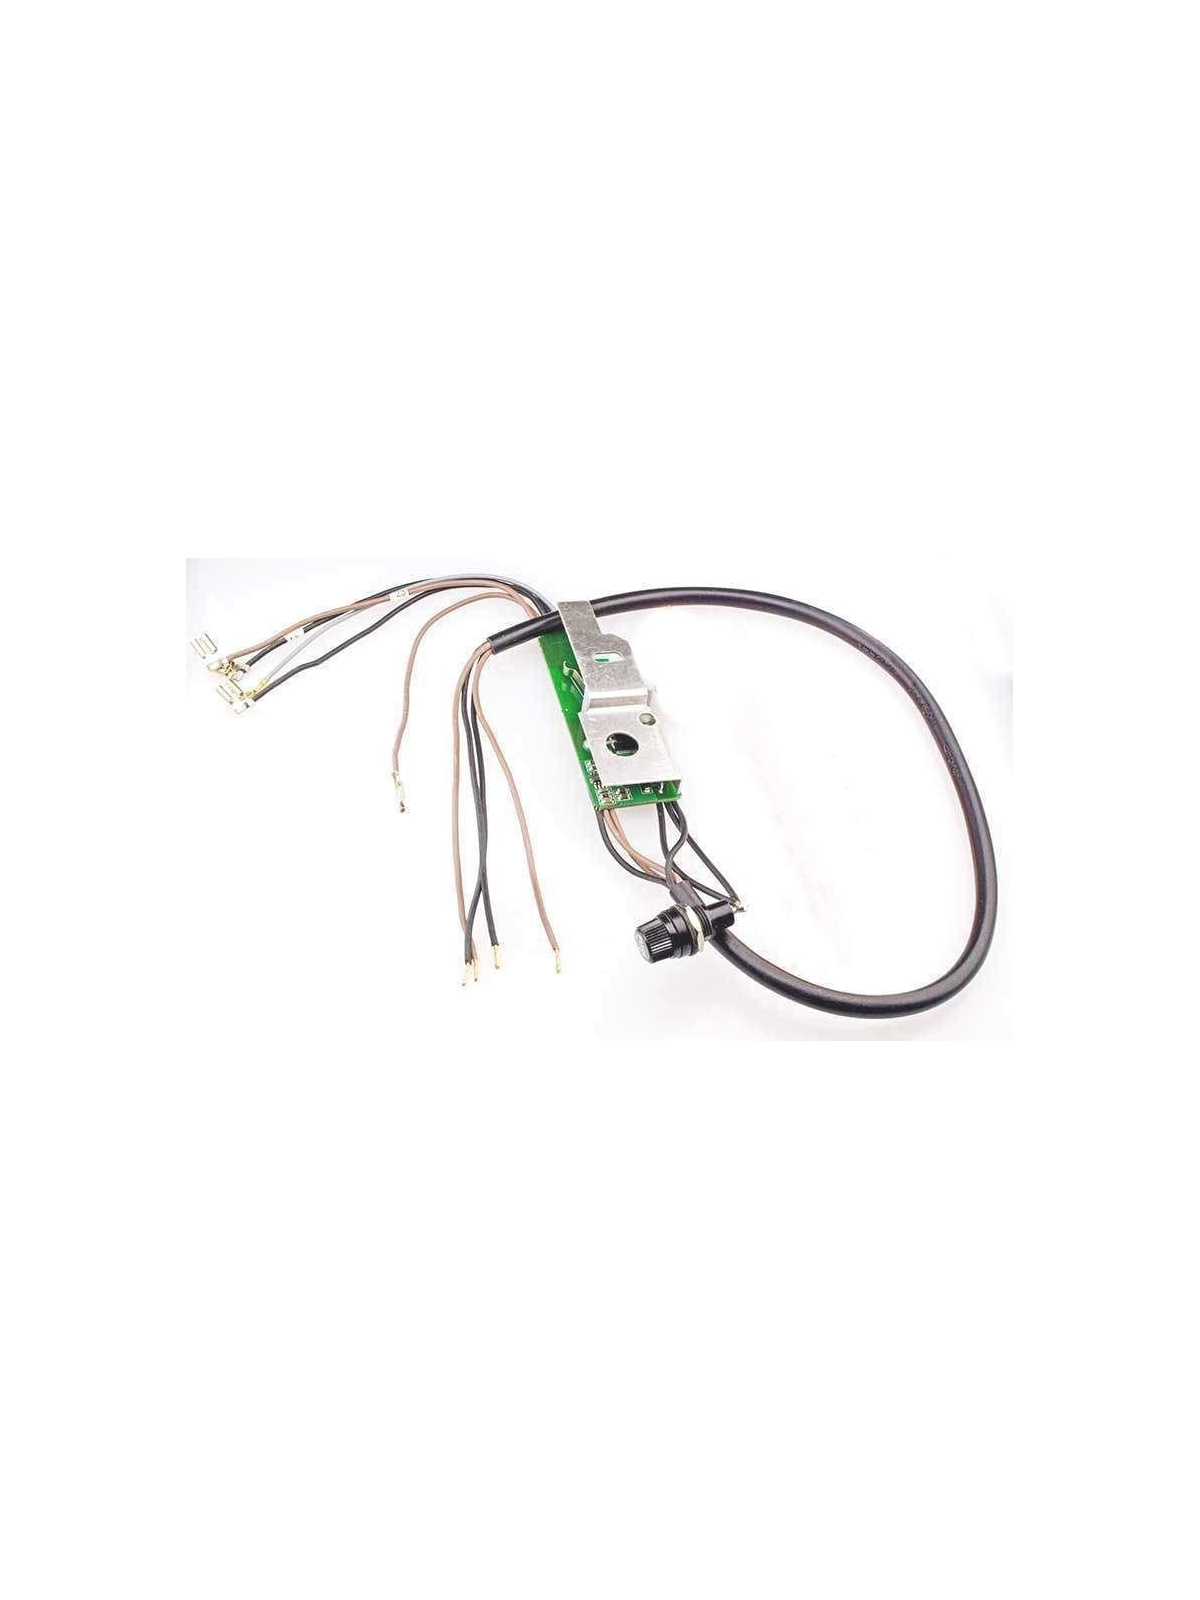 3346589 ELECTRONIC CIRCUIT+WIRES ASS'Y Virutex | JVL-Europe